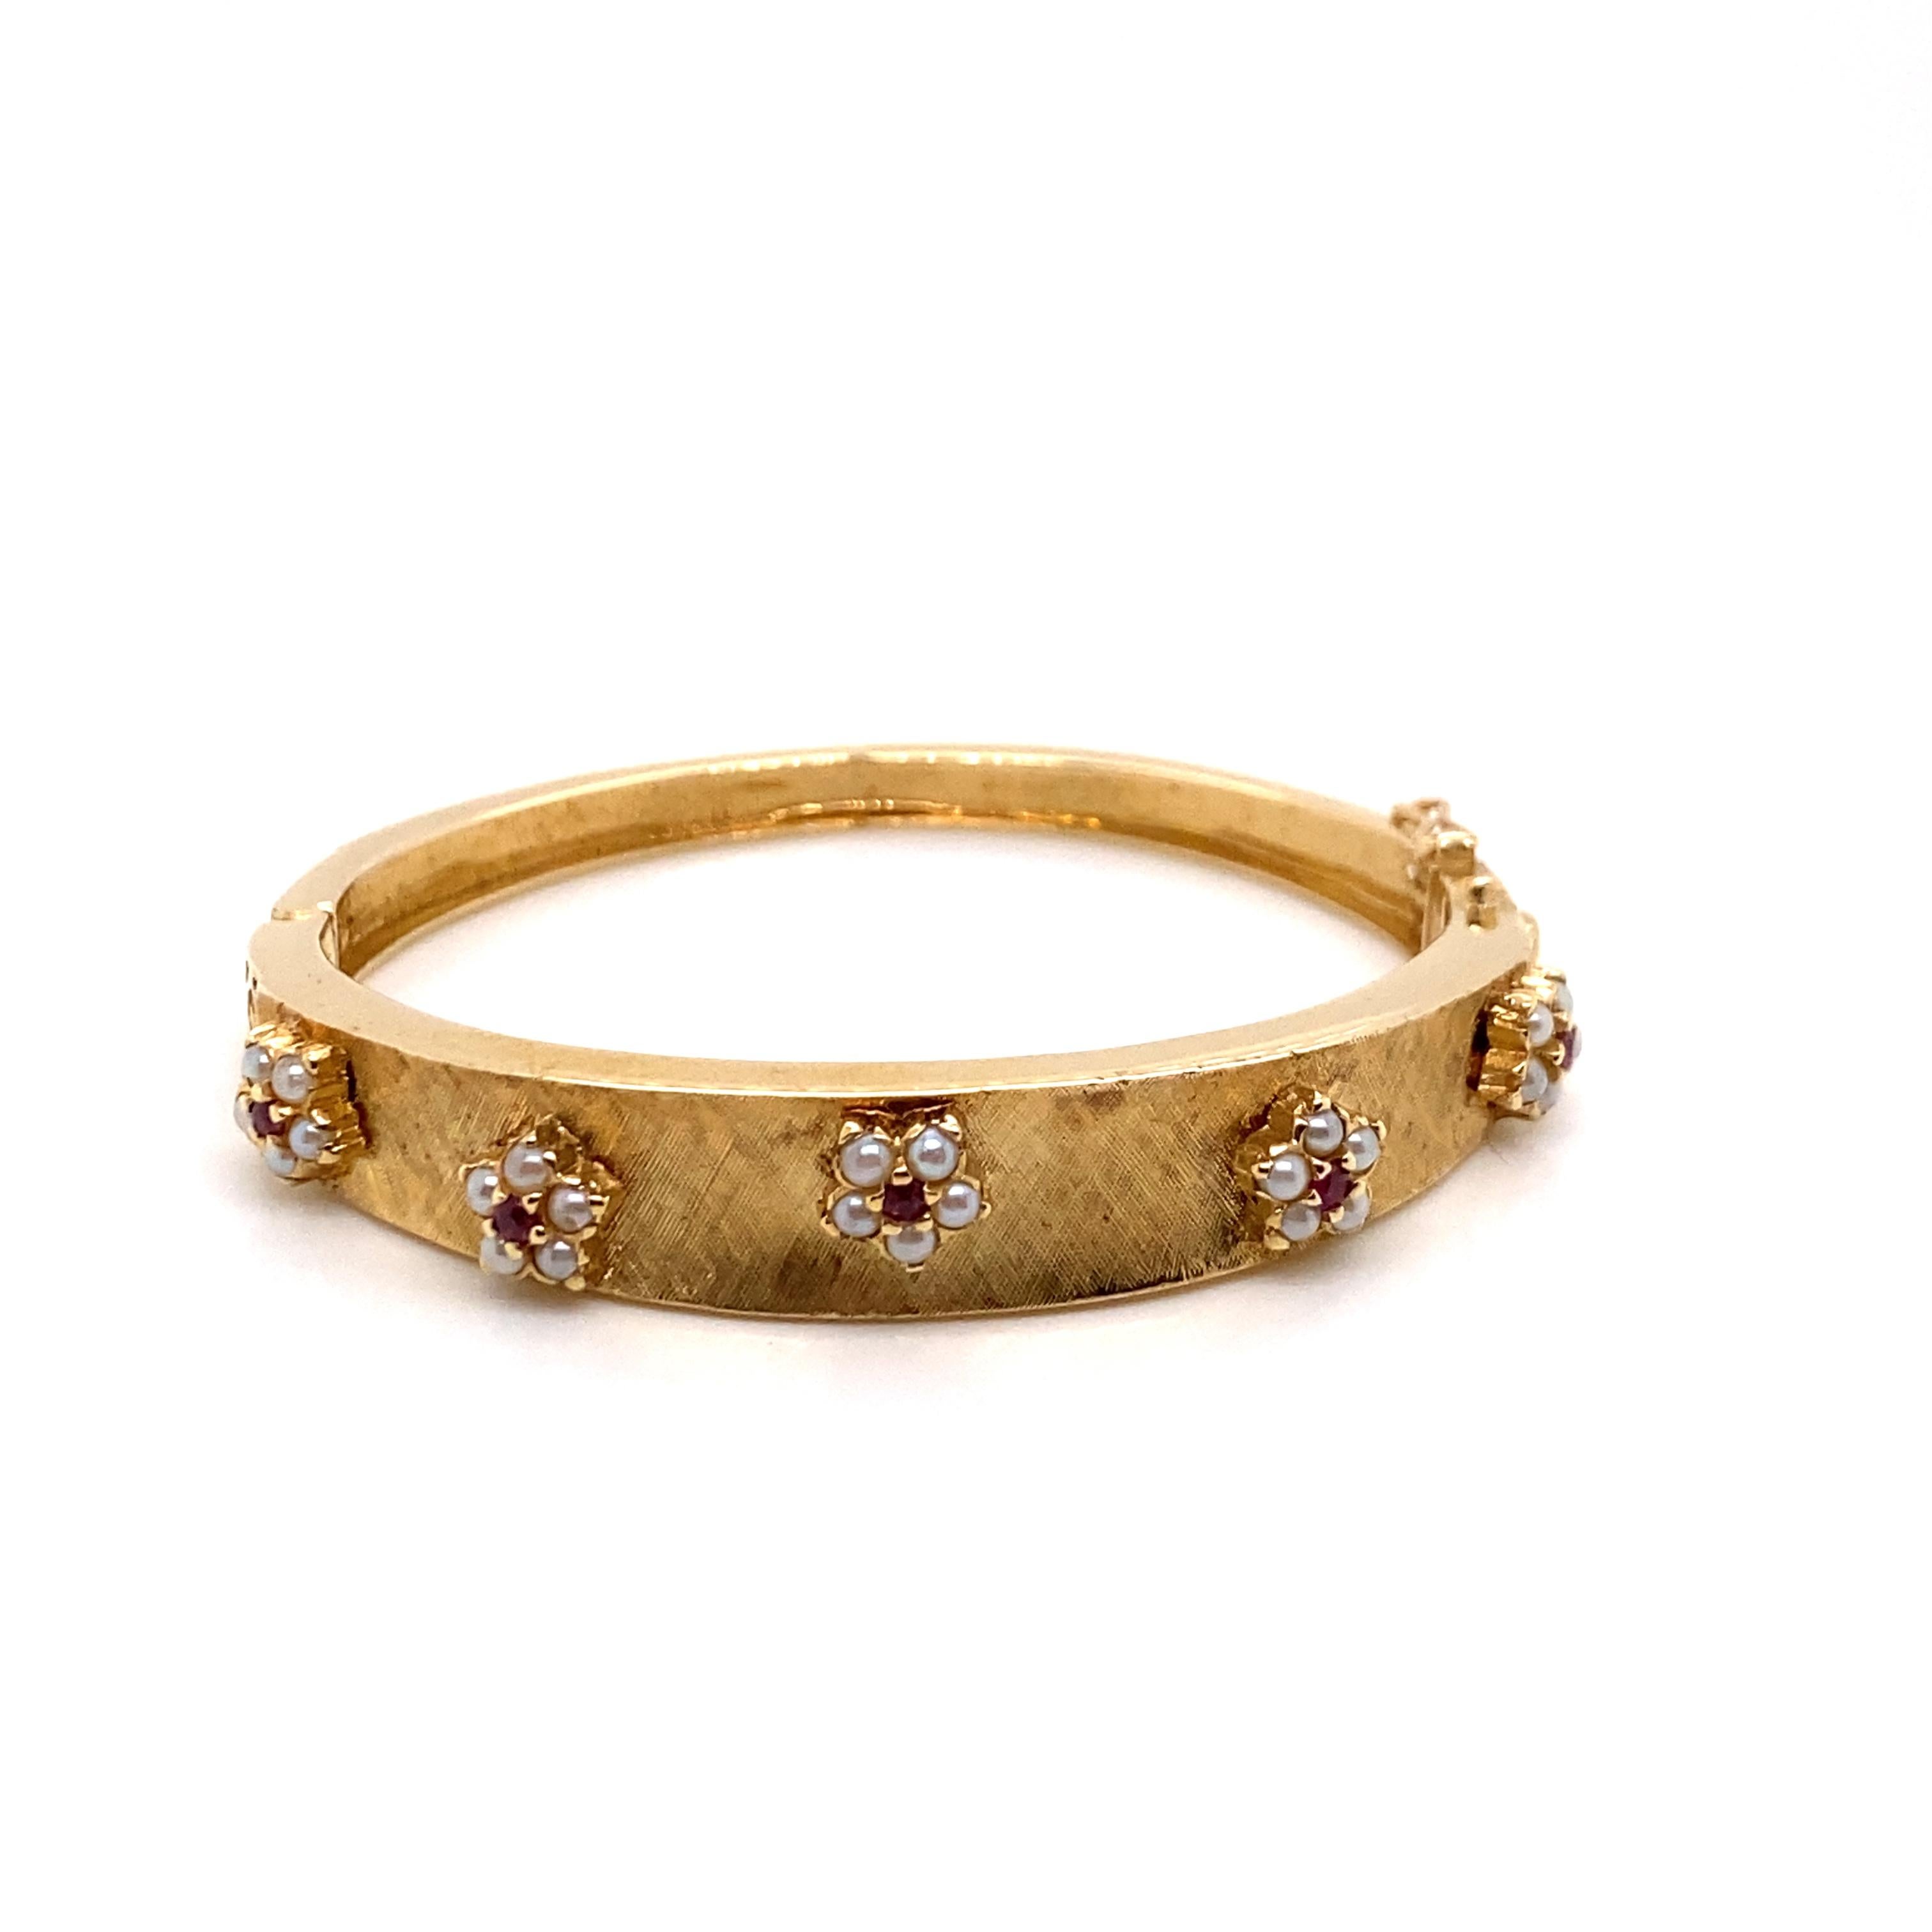 Retro Vintage 14k Yellow Gold Bangle Bracelet with Ruby and Pearl Flowers For Sale